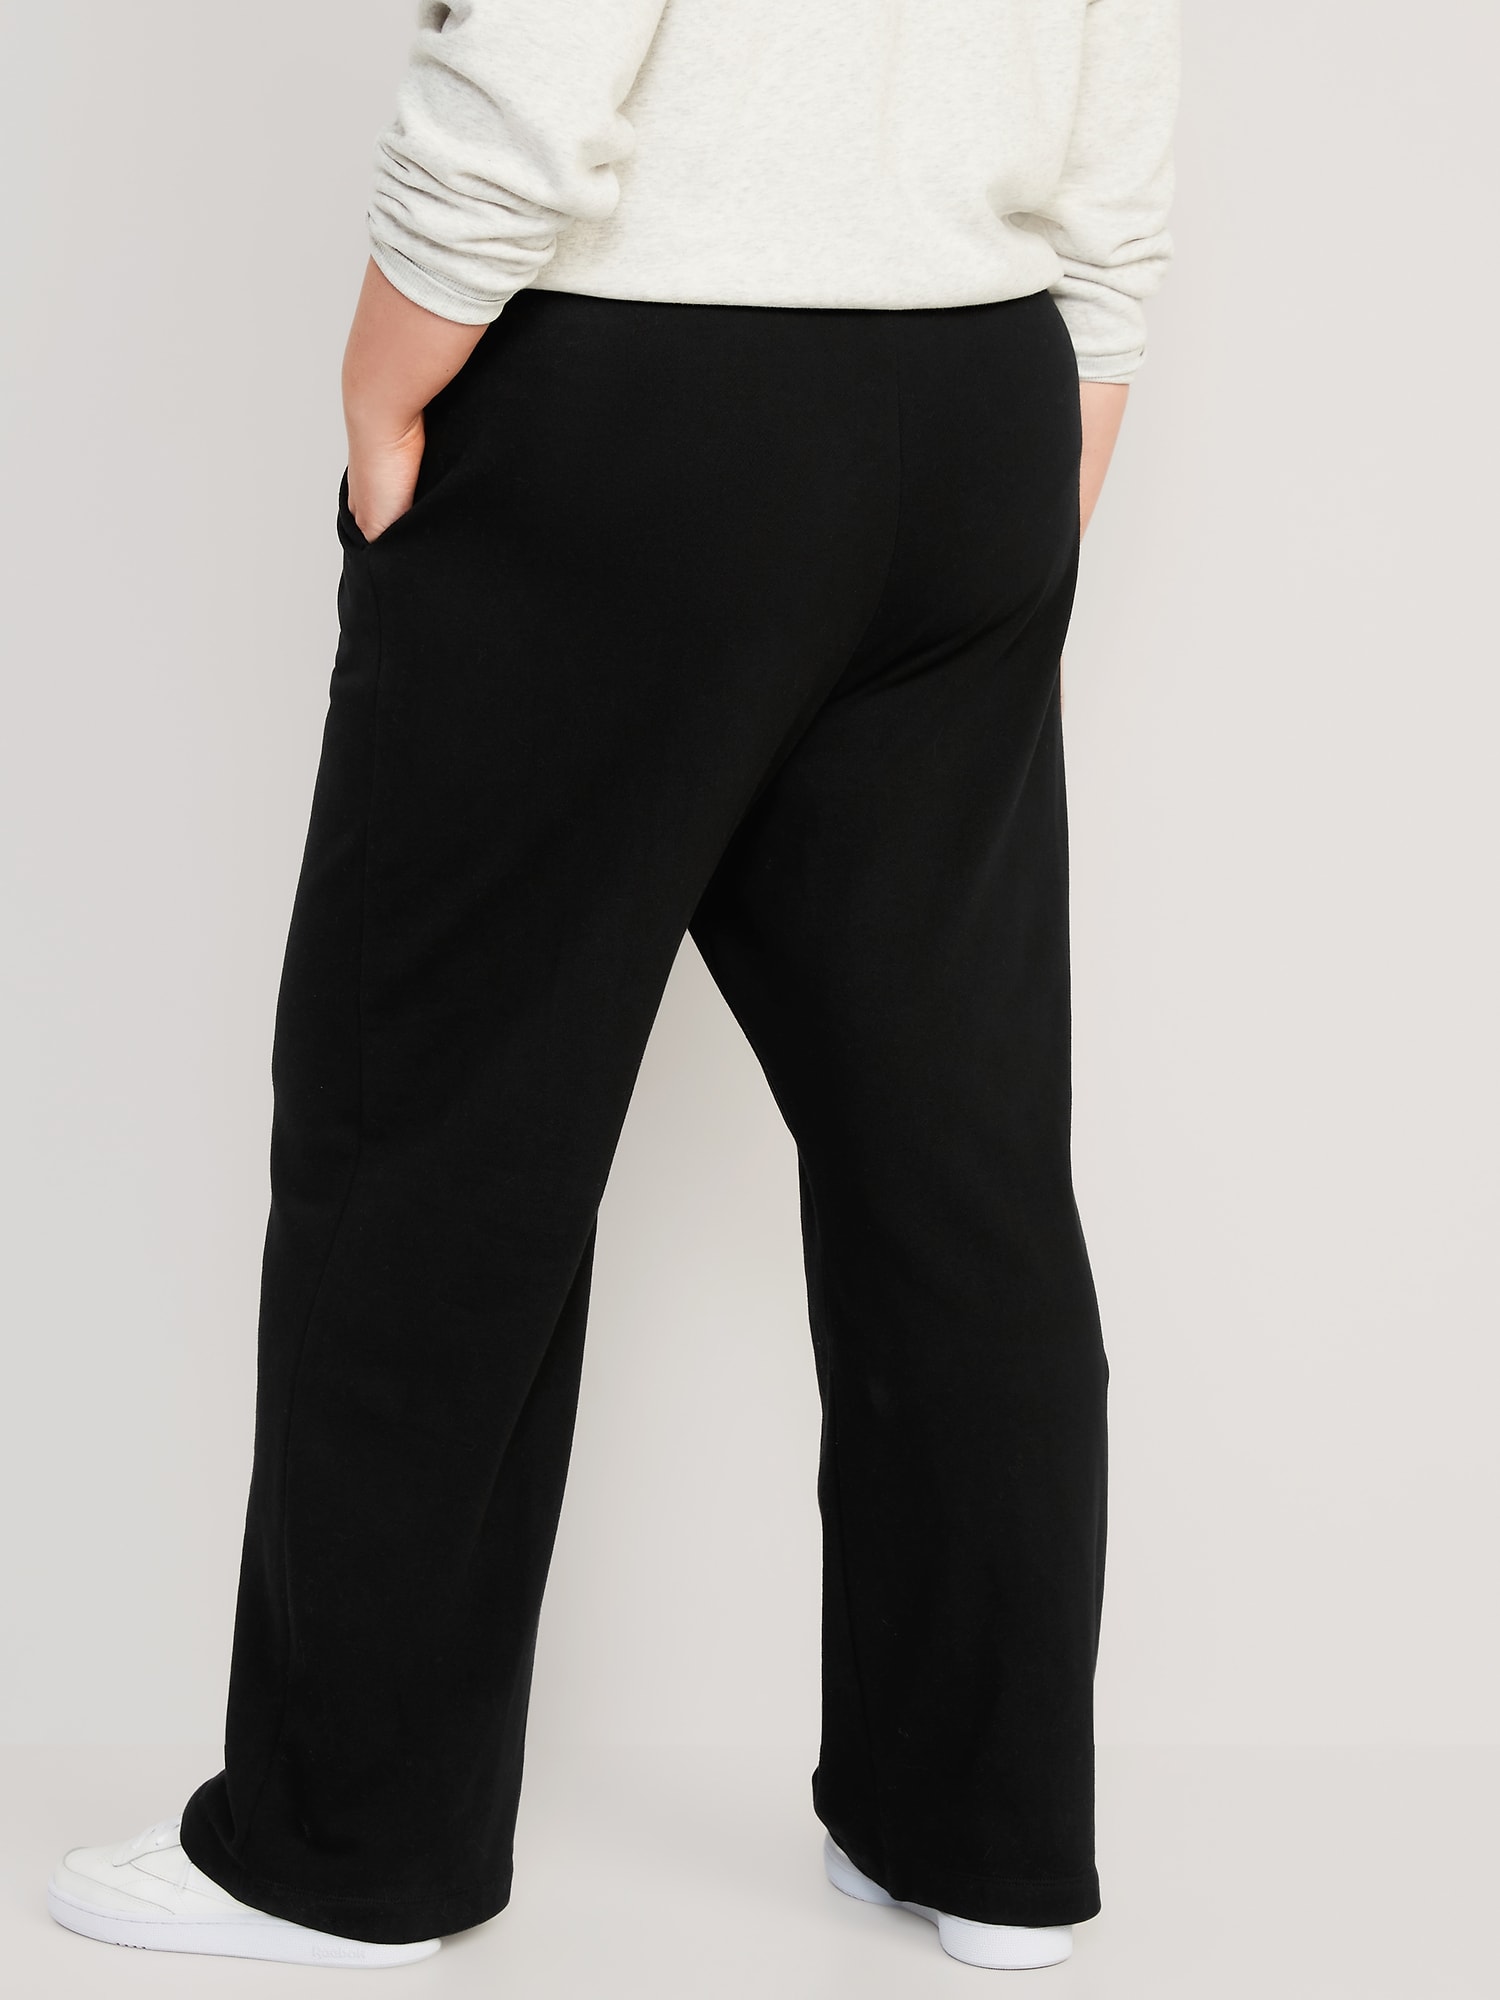 for Navy Vintage High-Waisted | Women Extra Old Sweatpants